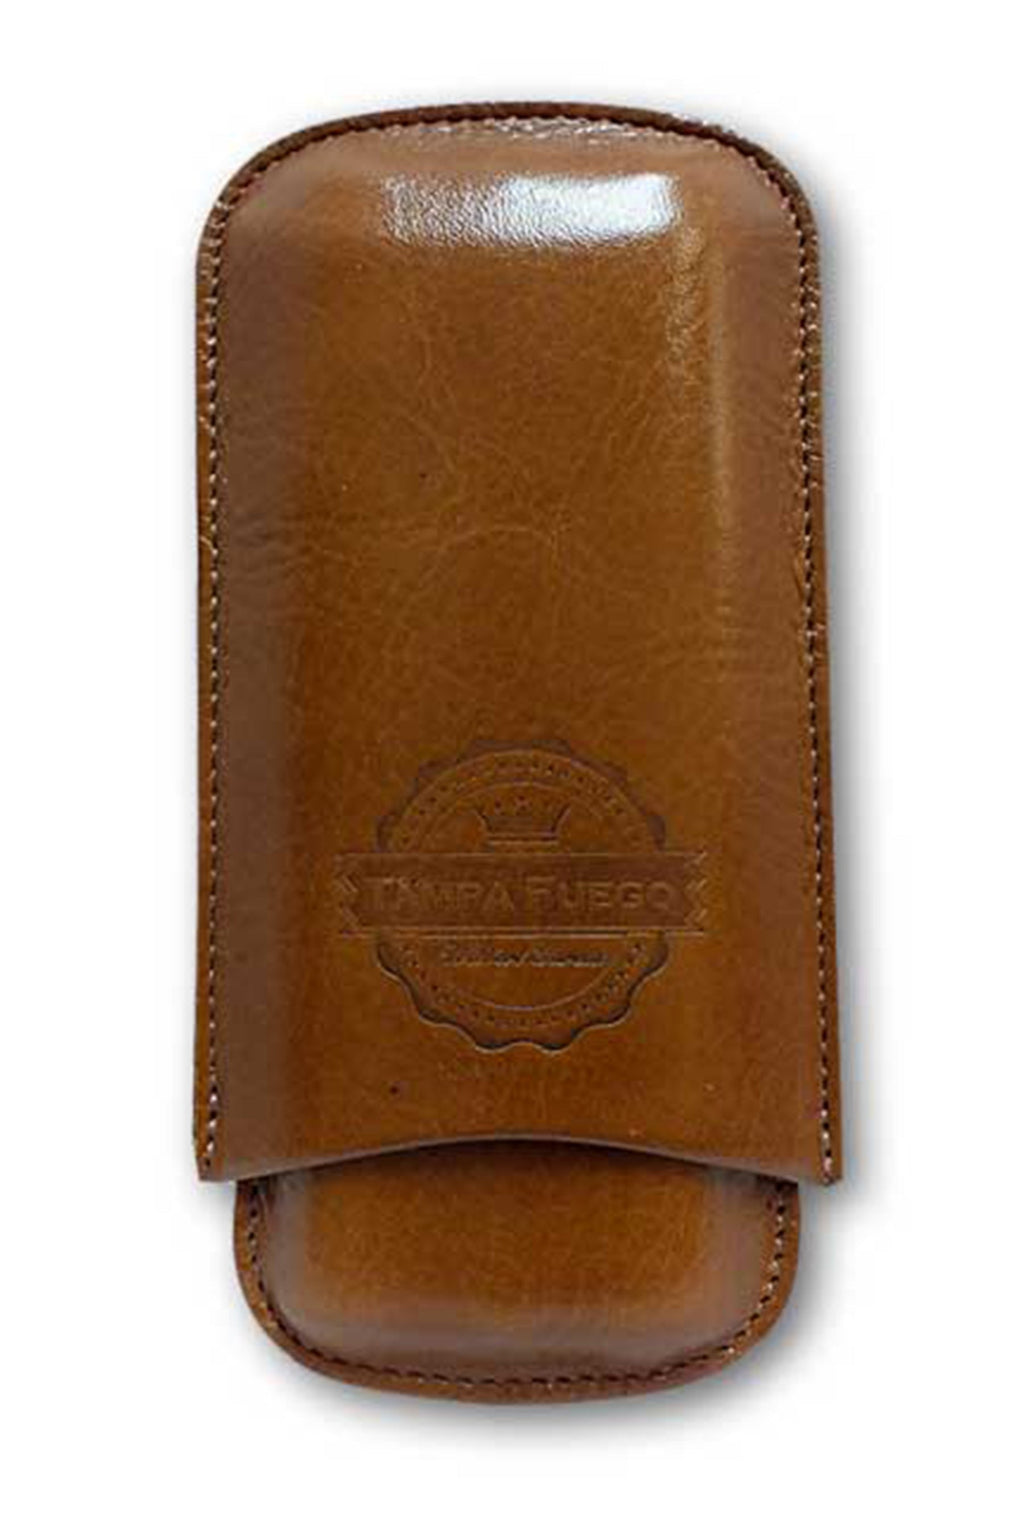 Natural Genuine Leather Cigar Case | Made in USA - Bryant Park